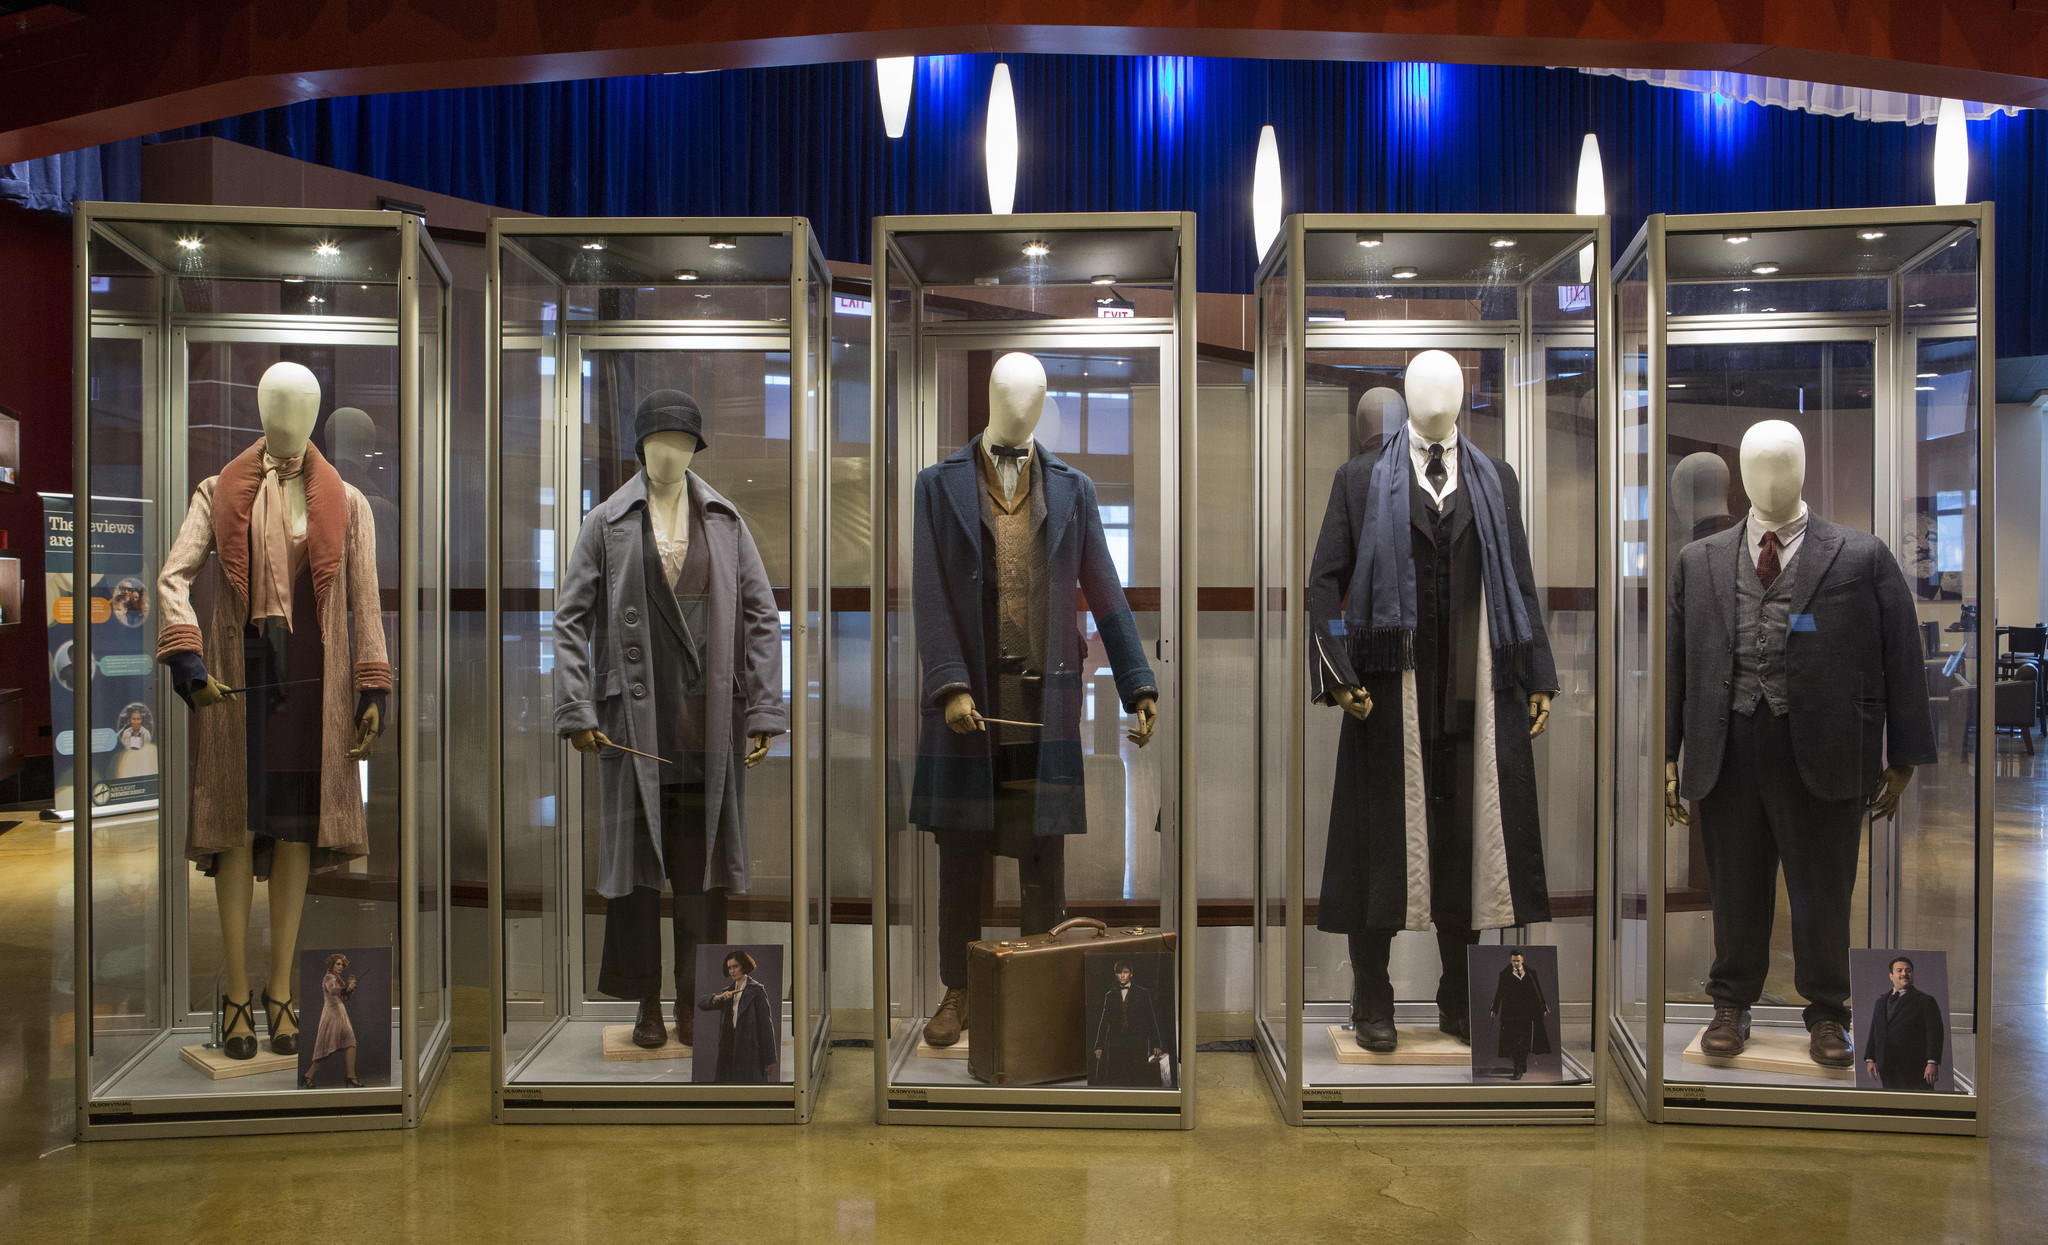 to-find-them-costumes-at-arclight-chicago-20161027.jpg